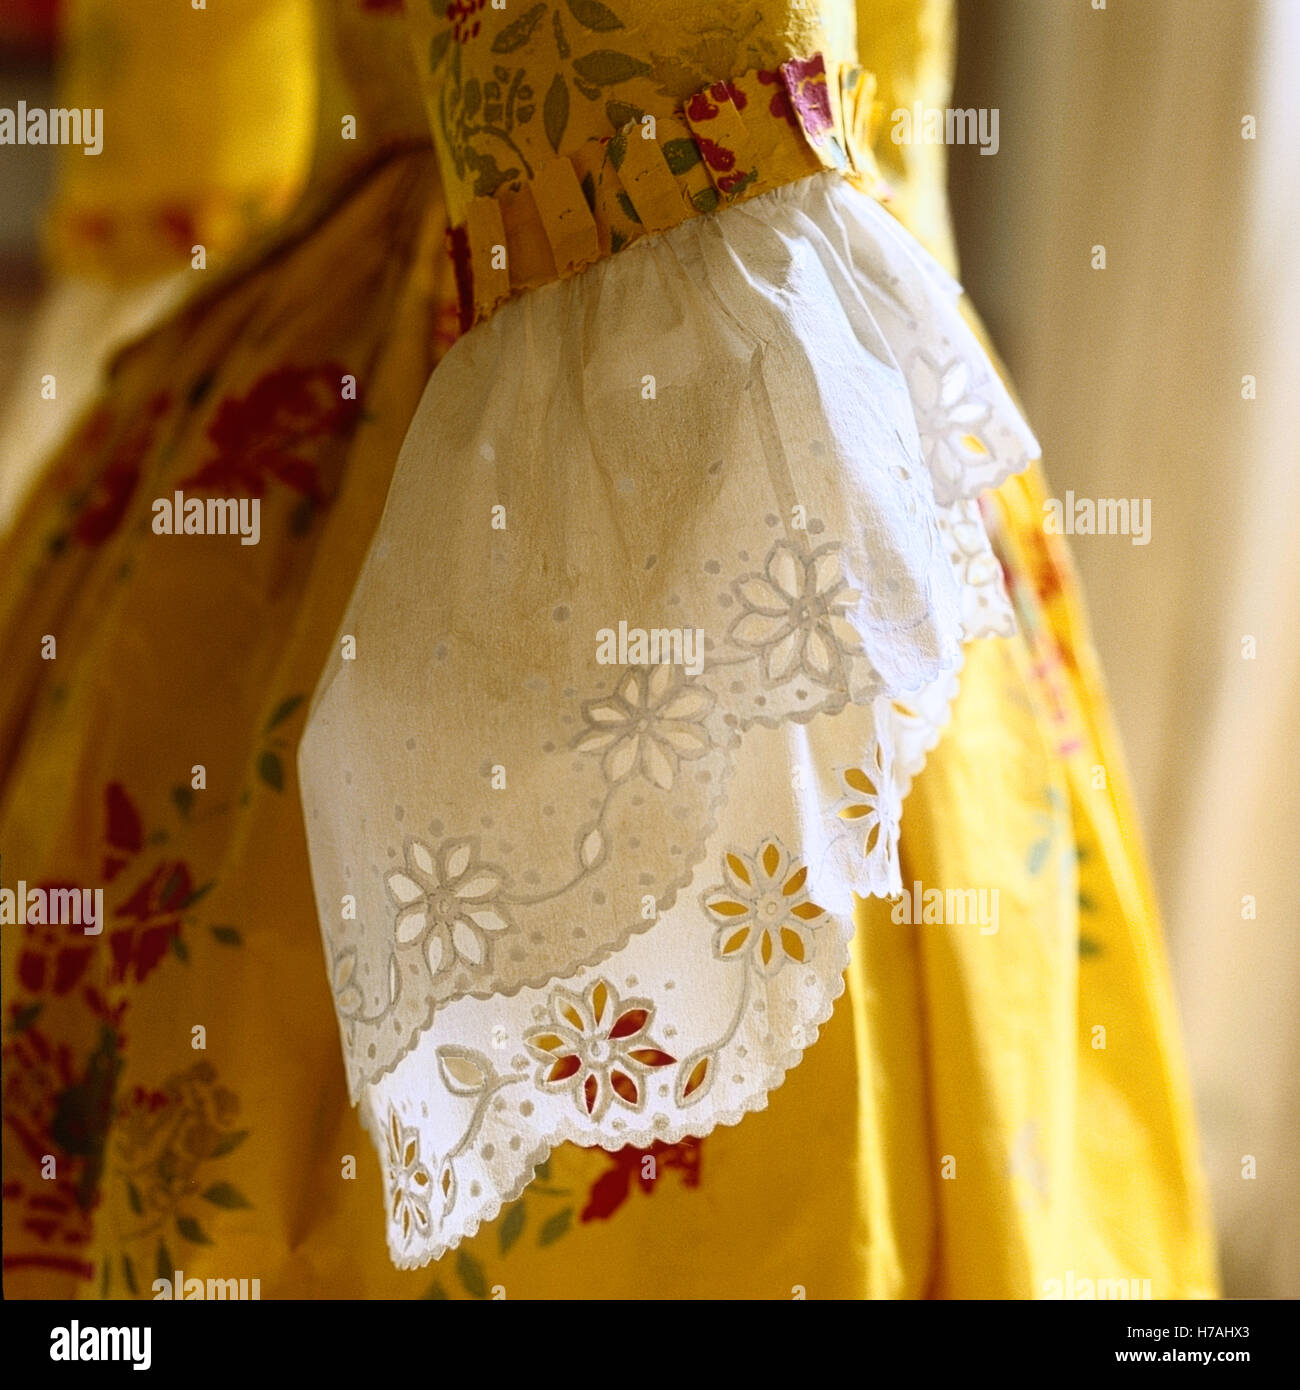 Lace sleeve detail on yellow patterned historical replica paper dress by Isabelle de Borchgrave Stock Photo